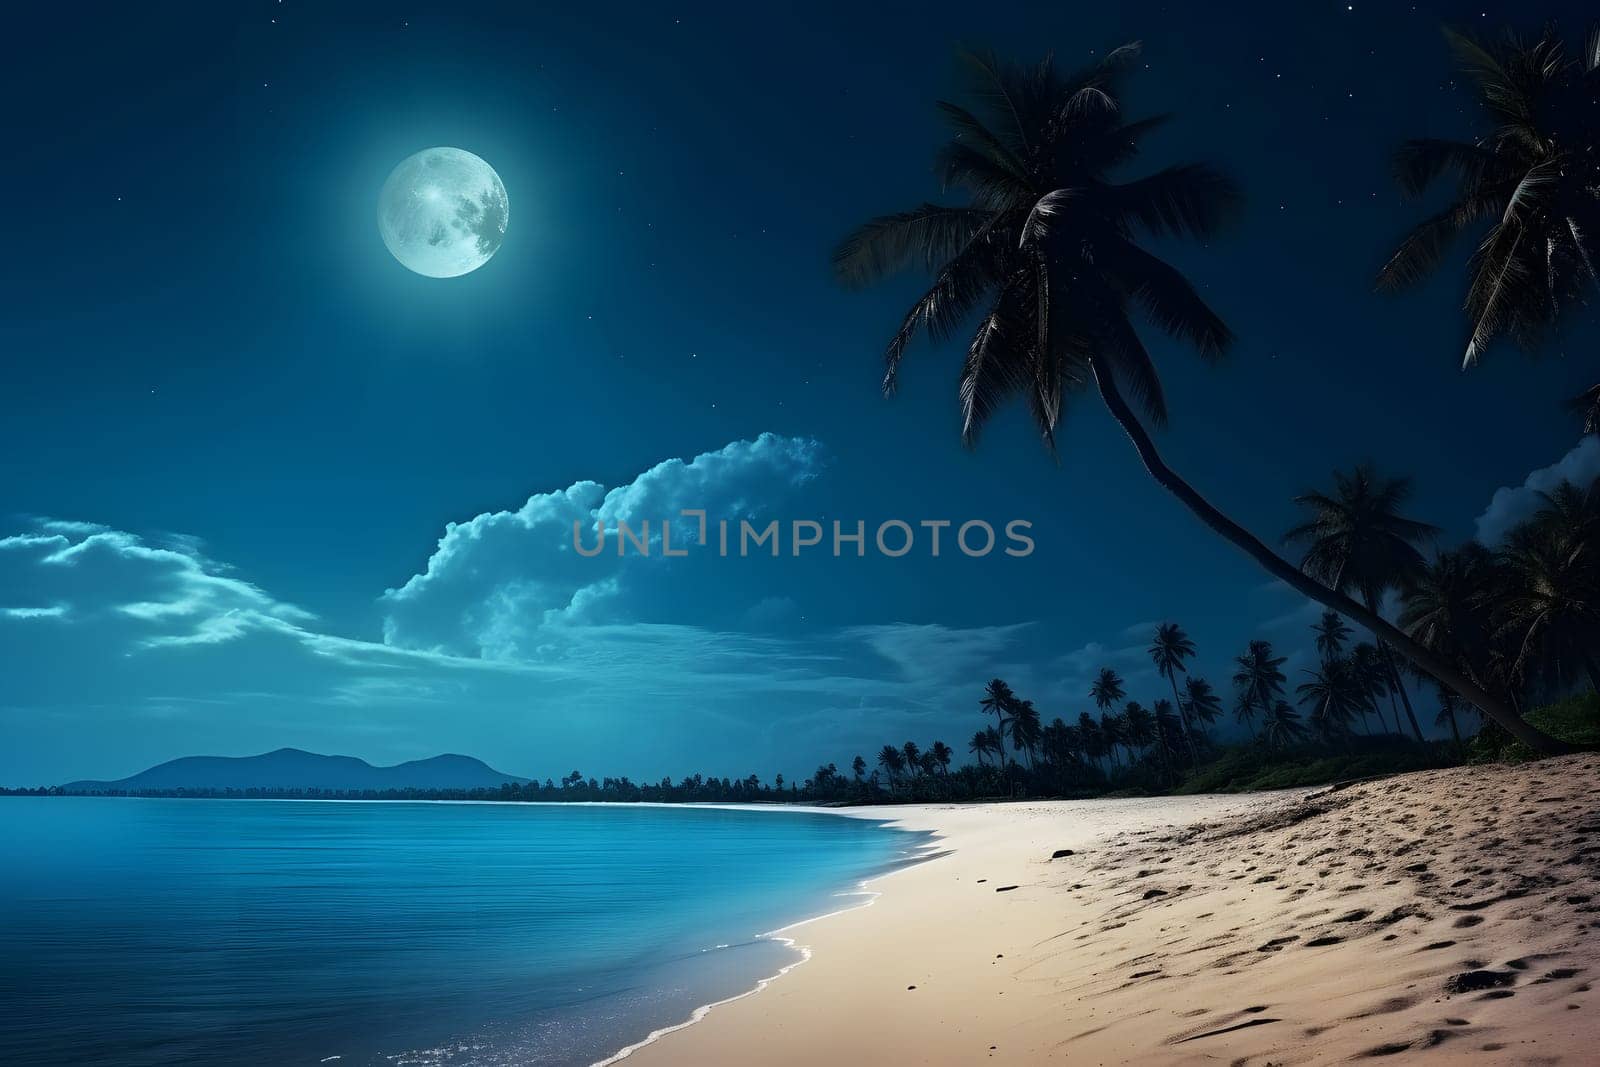 tropical beach view with white sand, turquoise water and palm tree at full moon night. Neural network generated photorealistic image. Not based on any actual scene or pattern.